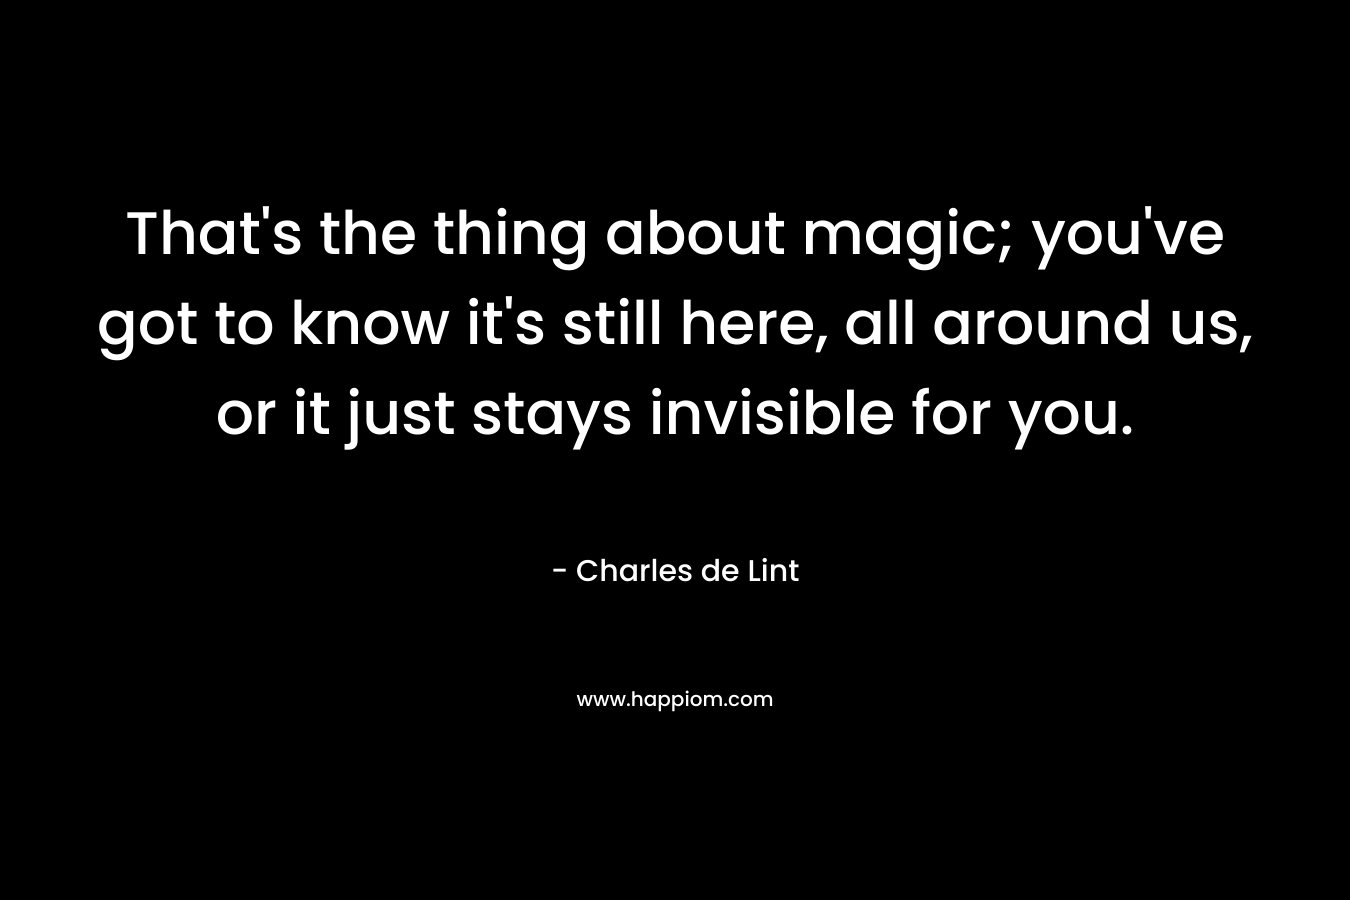 That’s the thing about magic; you’ve got to know it’s still here, all around us, or it just stays invisible for you. – Charles de Lint